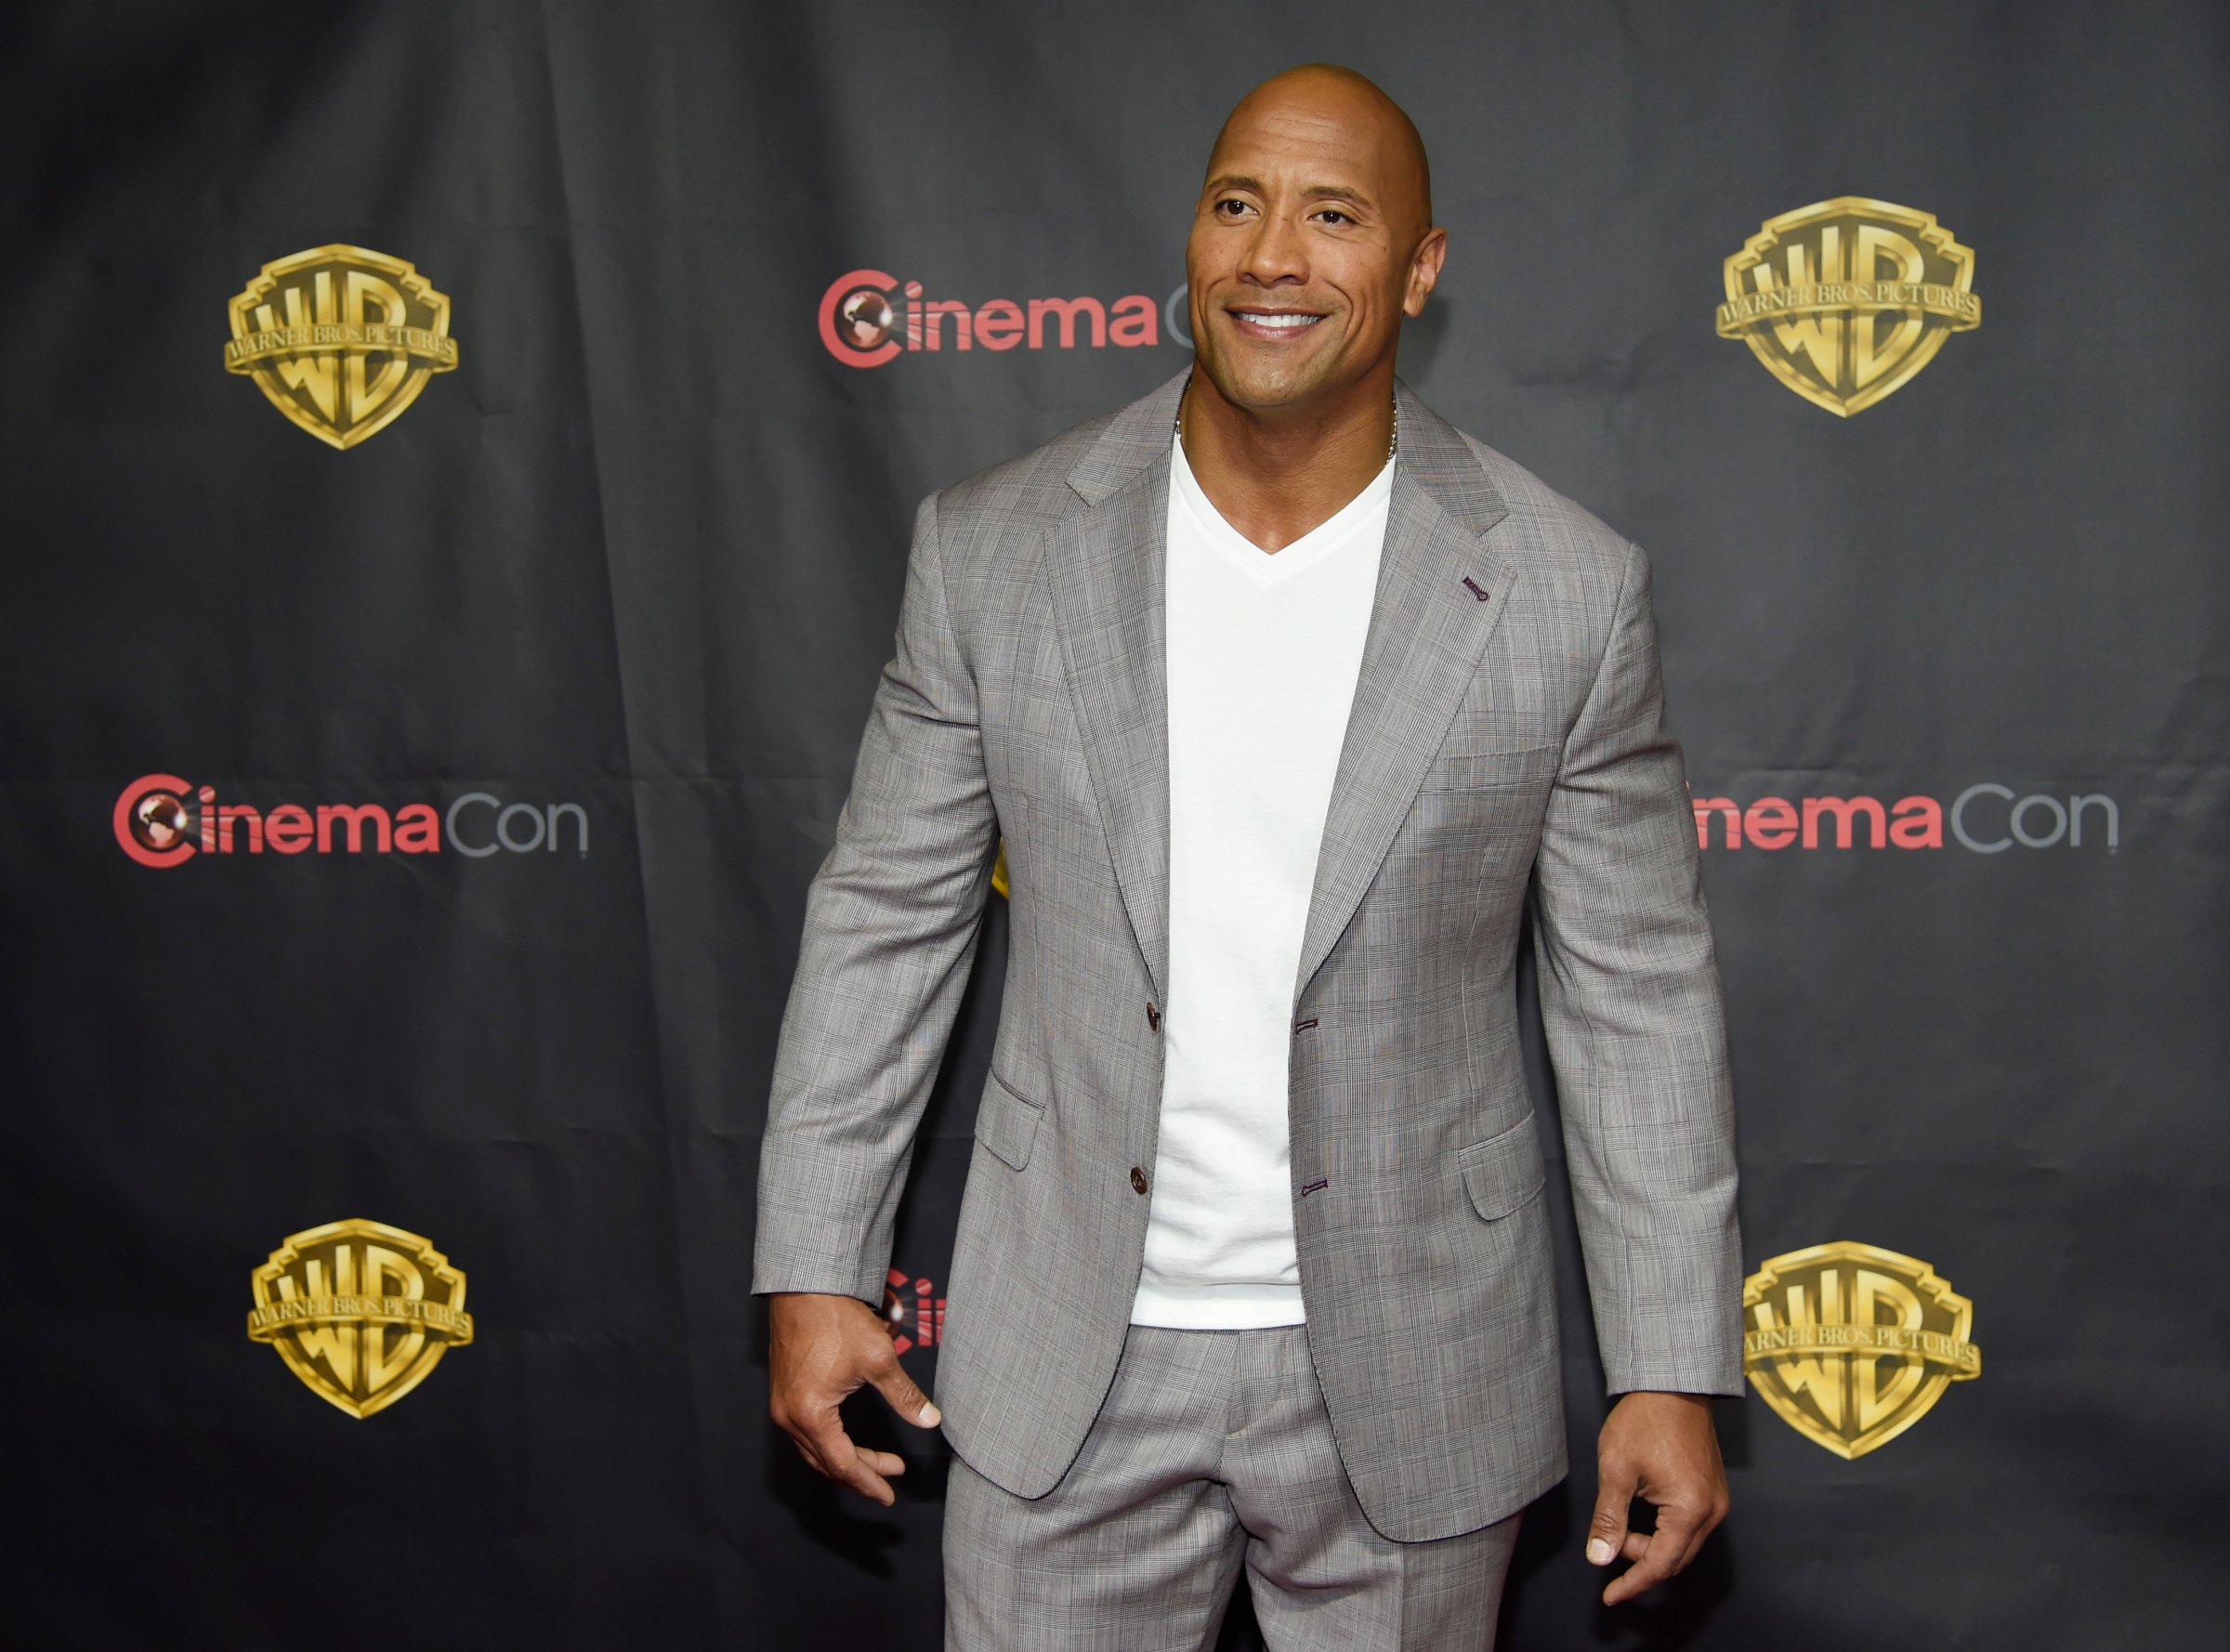 Dwayne Johnson, a cast member in the upcoming film "San Andreas," poses before the Warner Bros. presentation at CinemaCon 2015 at Caesars Palace on Tuesday, April 21, 2015, in Las Vegas